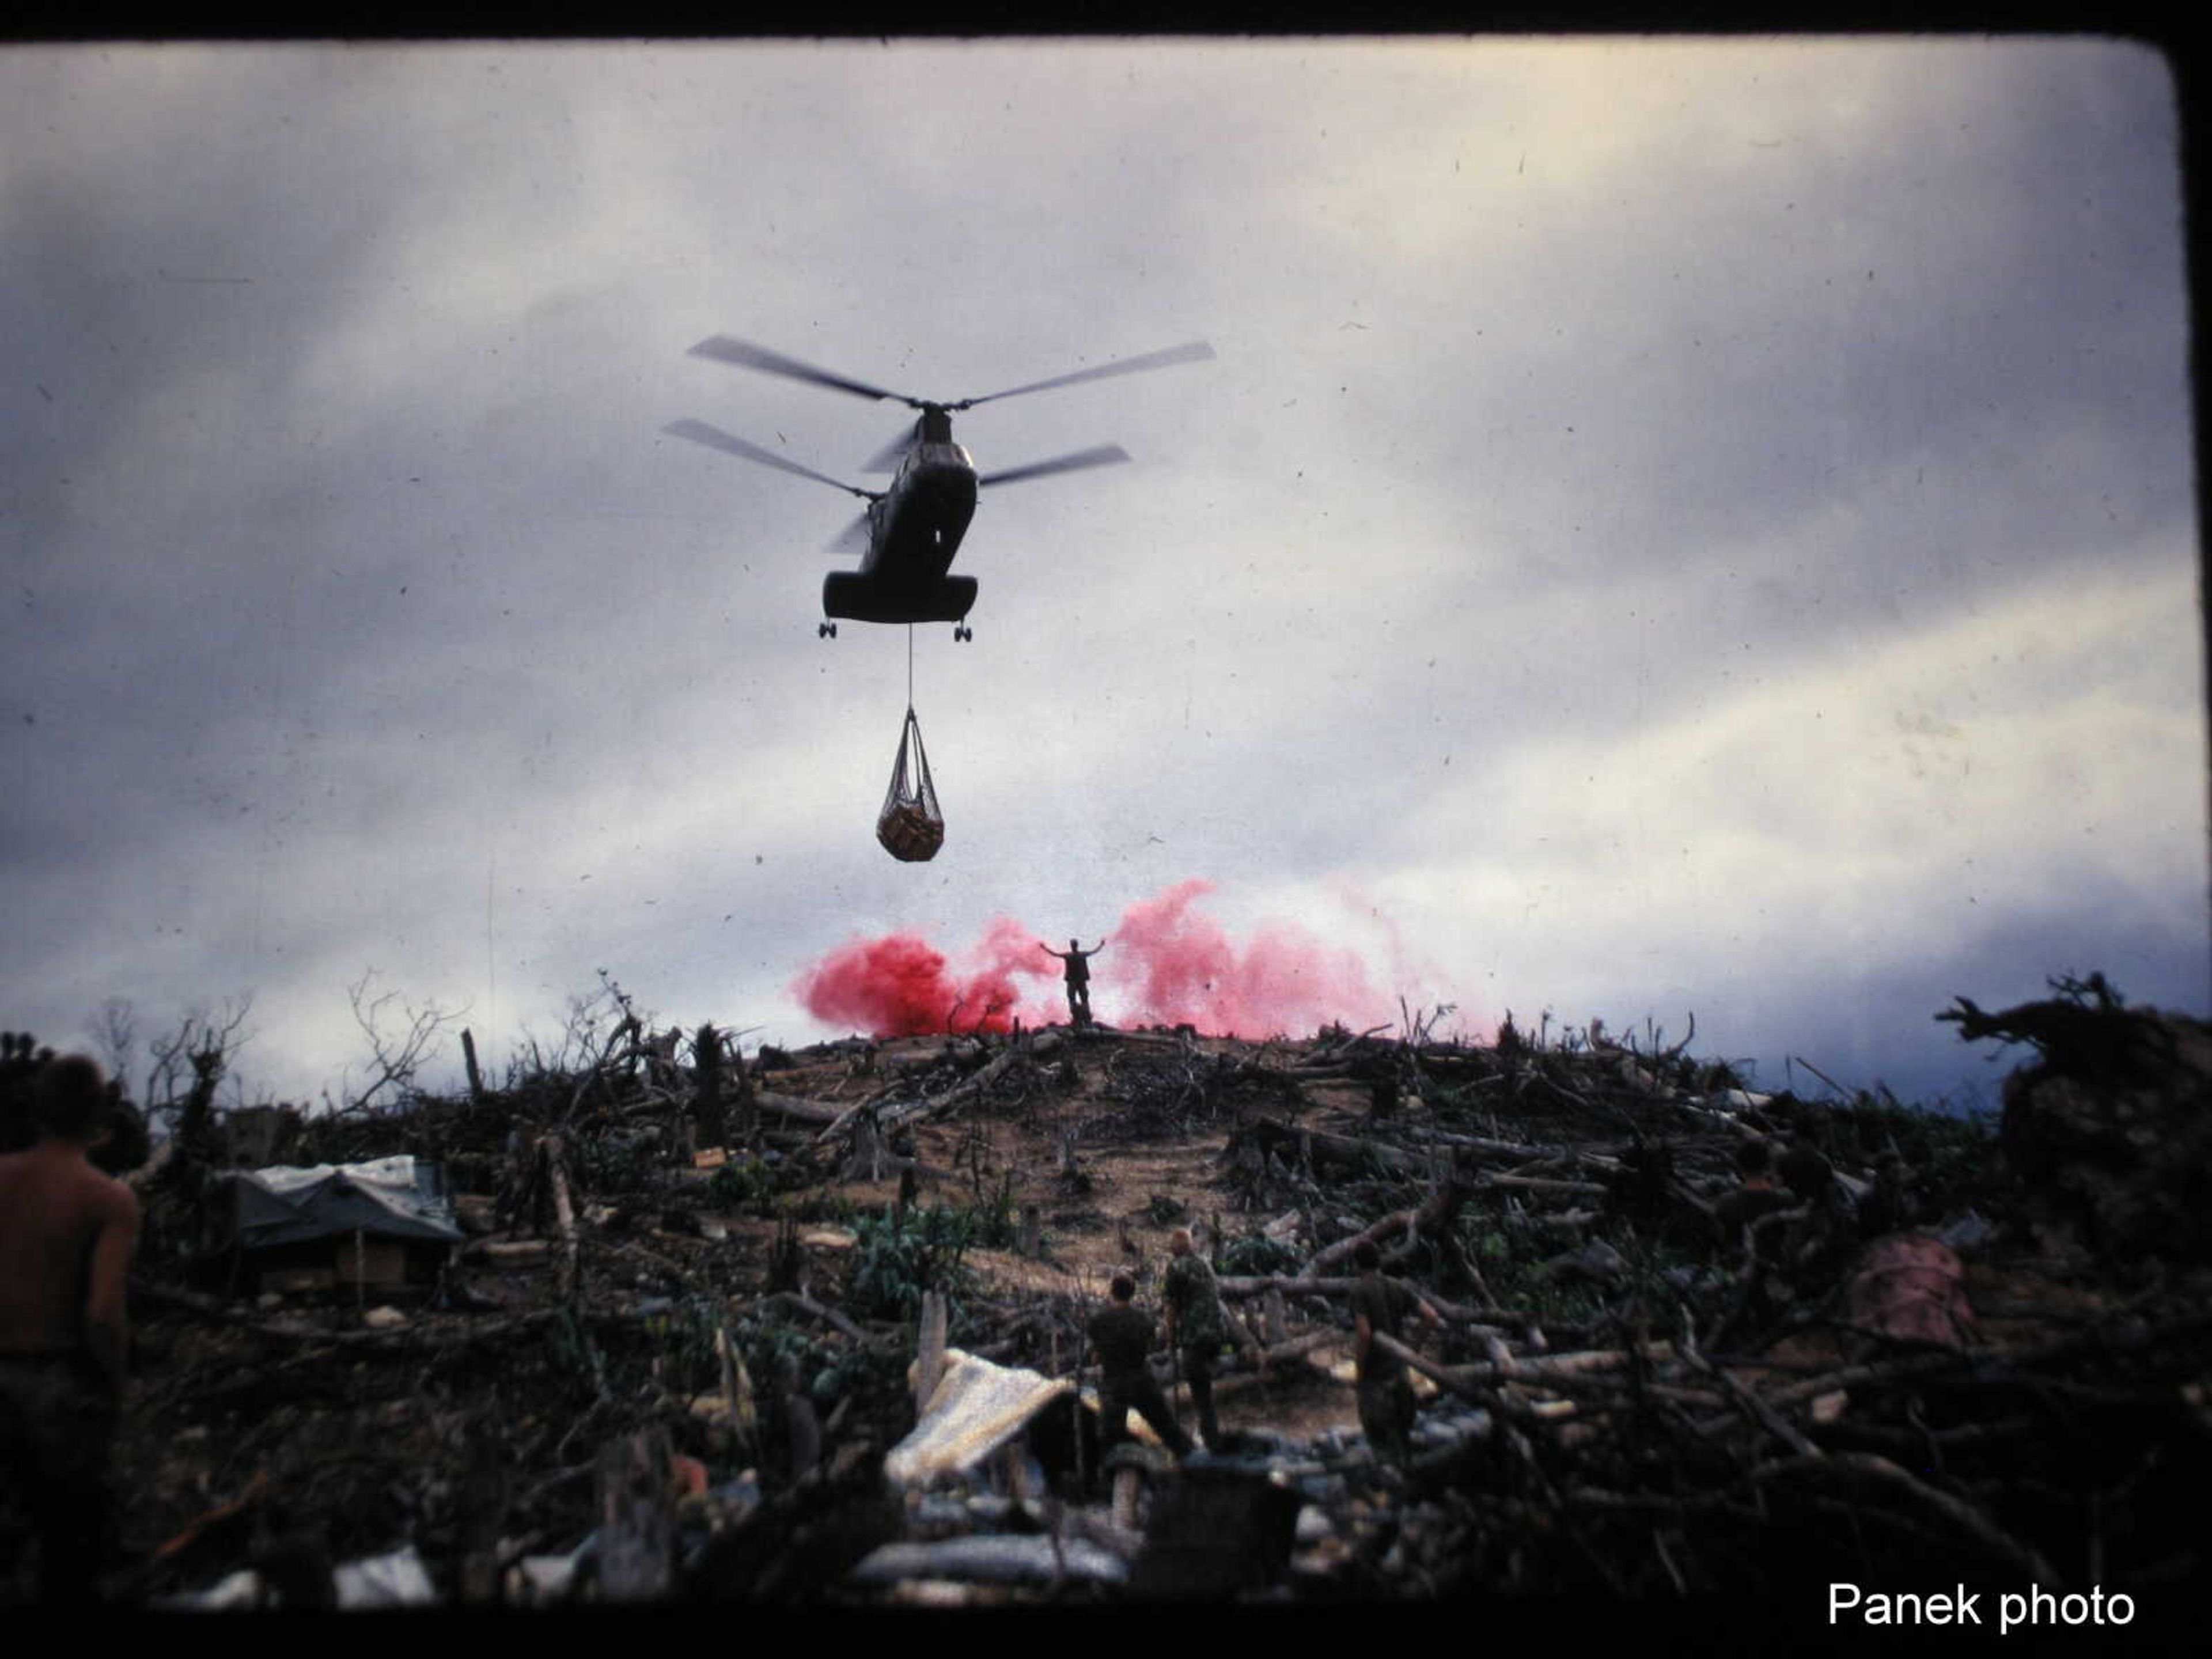 A CH-46 helicopter resupplies Marines in Vietnam, LZ Catapult (Hill 477)
May 9-June 11, 1969.